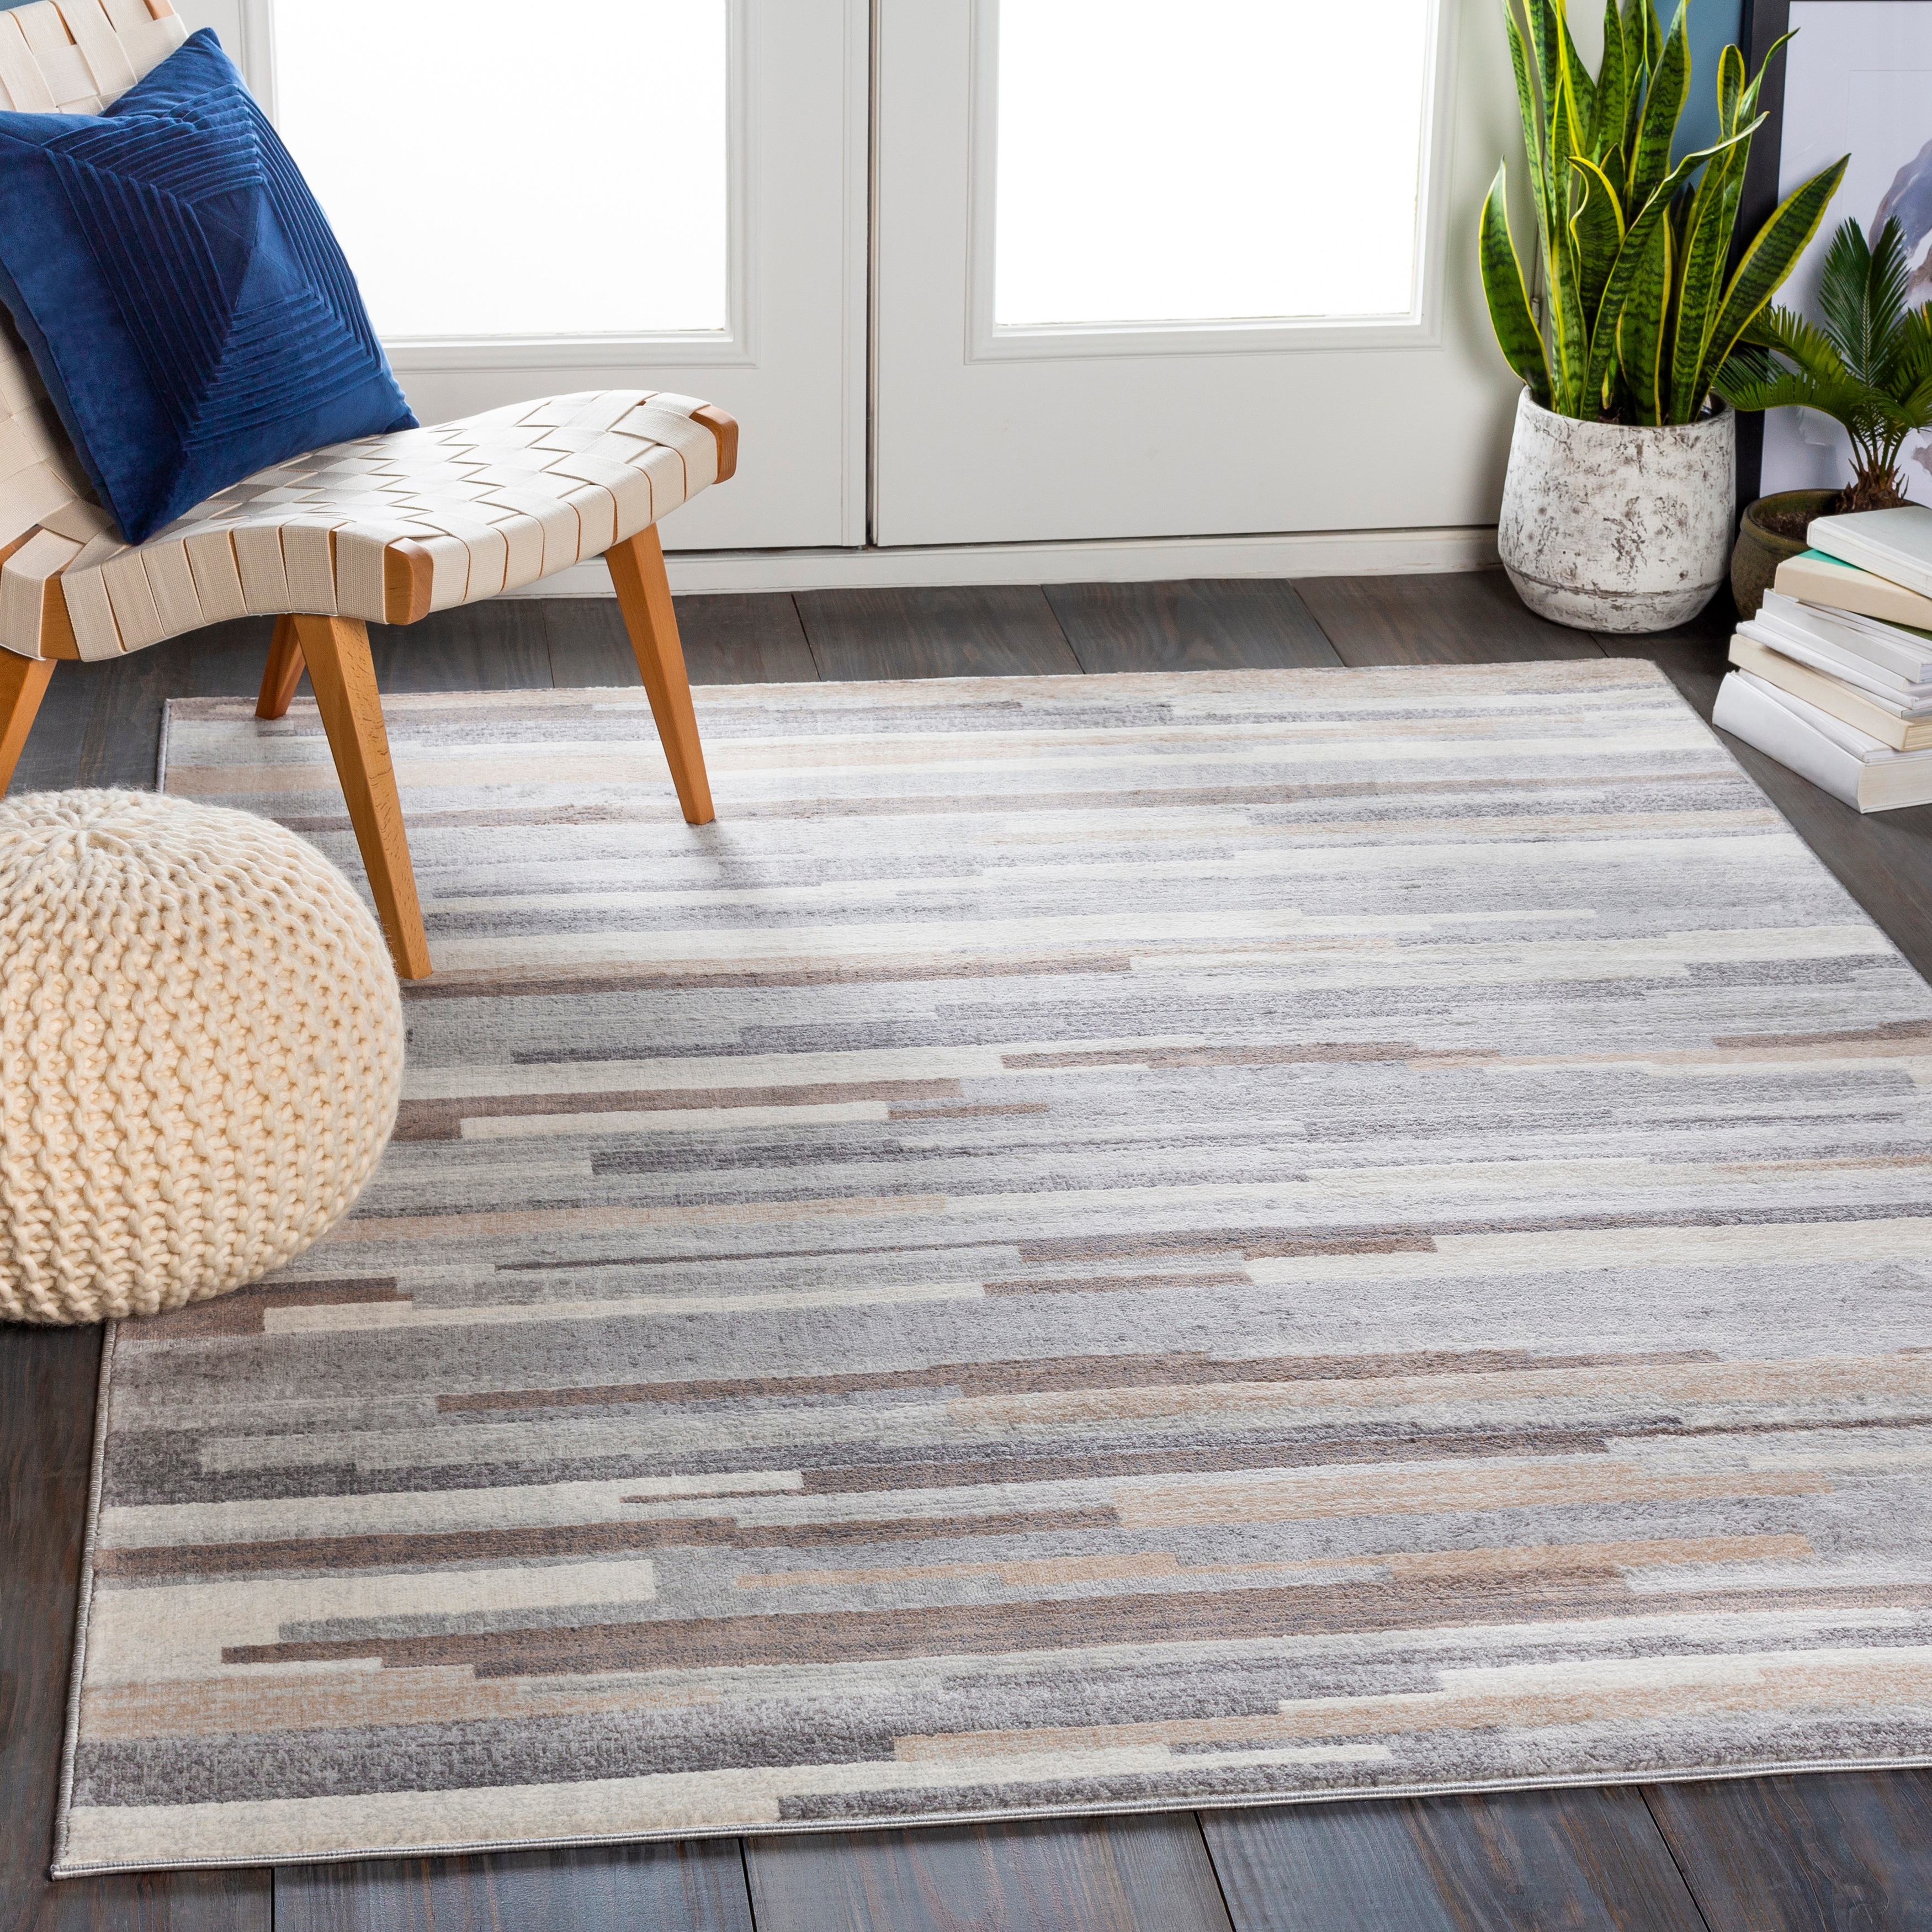 https://ak1.ostkcdn.com/images/products/is/images/direct/dbad78dd7767e19f2d95483357e55458ba65a310/Moe-Striped-Area-Rug.jpg